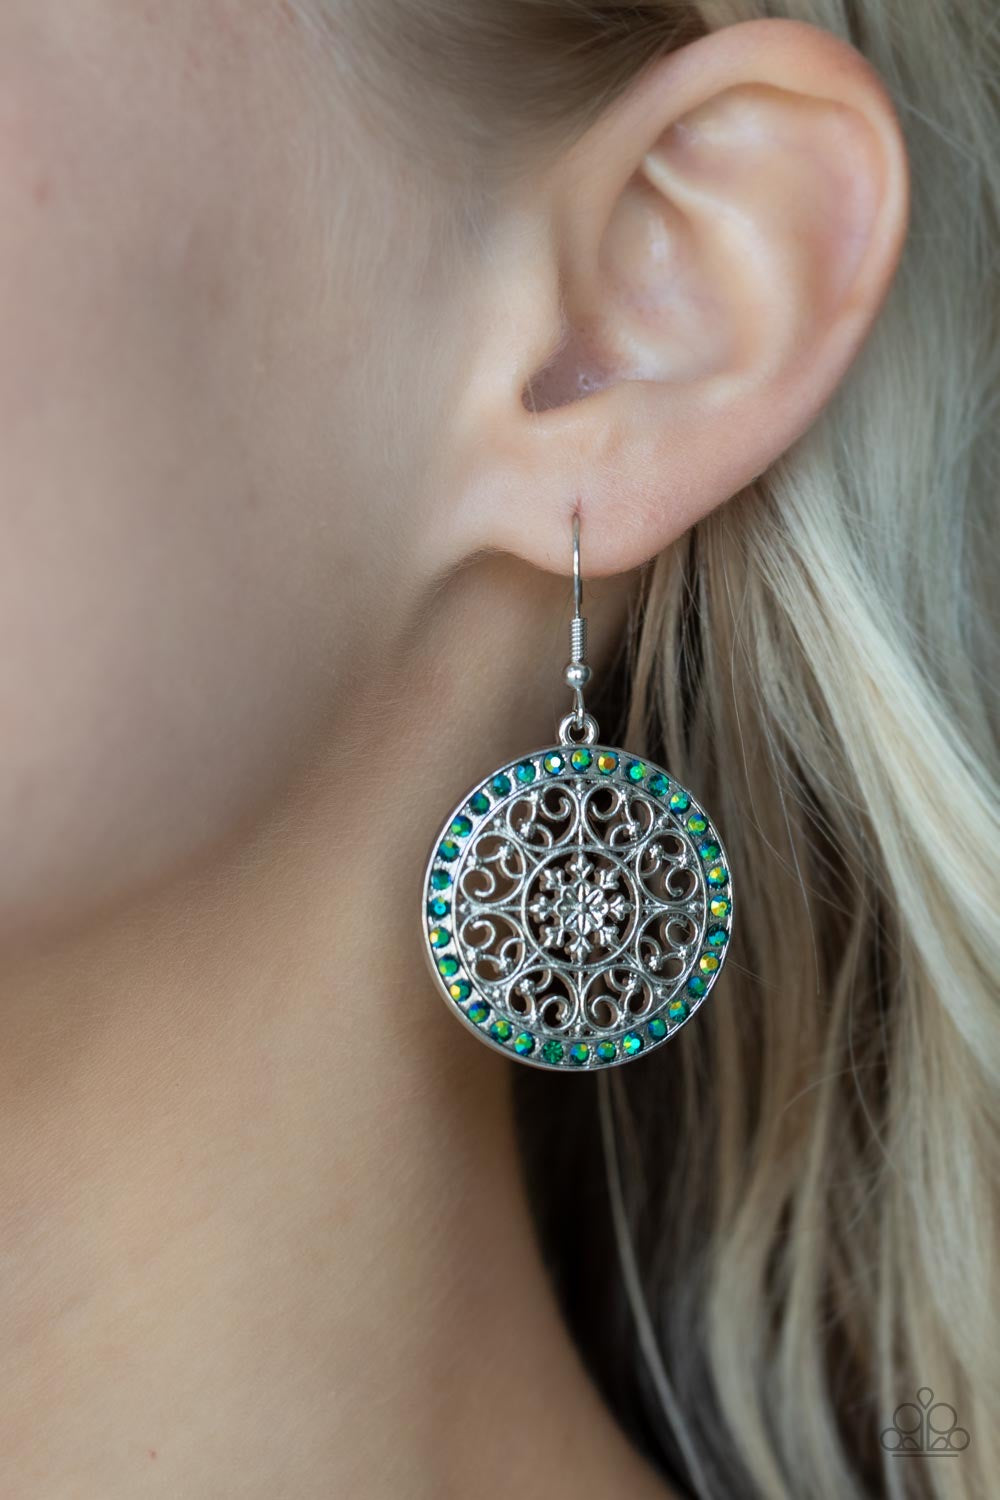 Infused with a border of iridescent green rhinestones, studded silver heart shape filigree fans out from a decorative silver floral center for a whimsical look. Earring attaches to a standard fishhook fitting.  Sold as one pair of earrings.